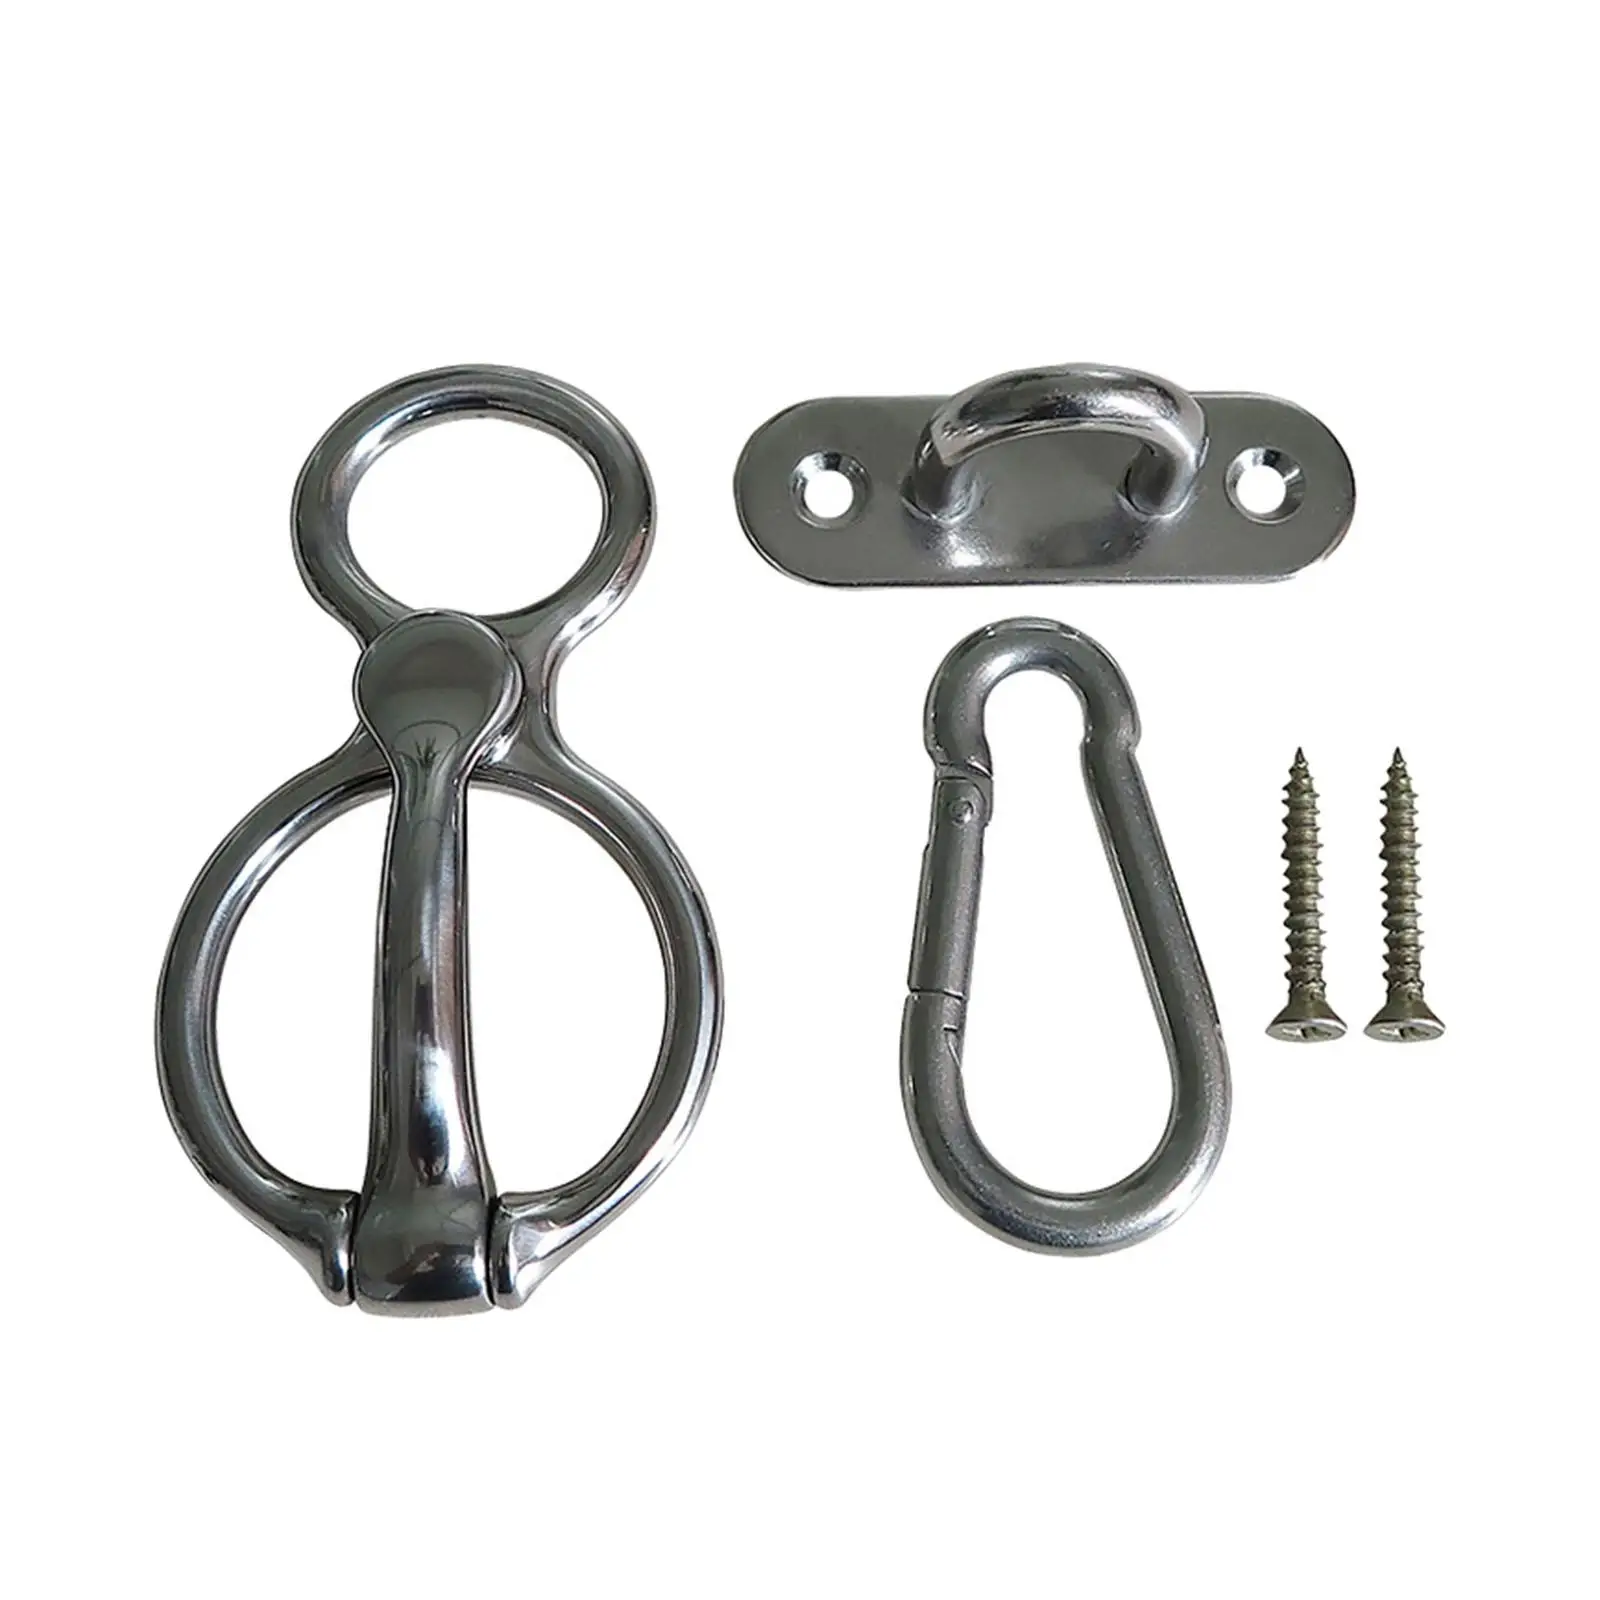 Horse Tie Ring Fasteners Equestrian Hooks Livestock Tie Off with Eye Bolt Outdoor Sports Durable Quick Snap Stable Accessories